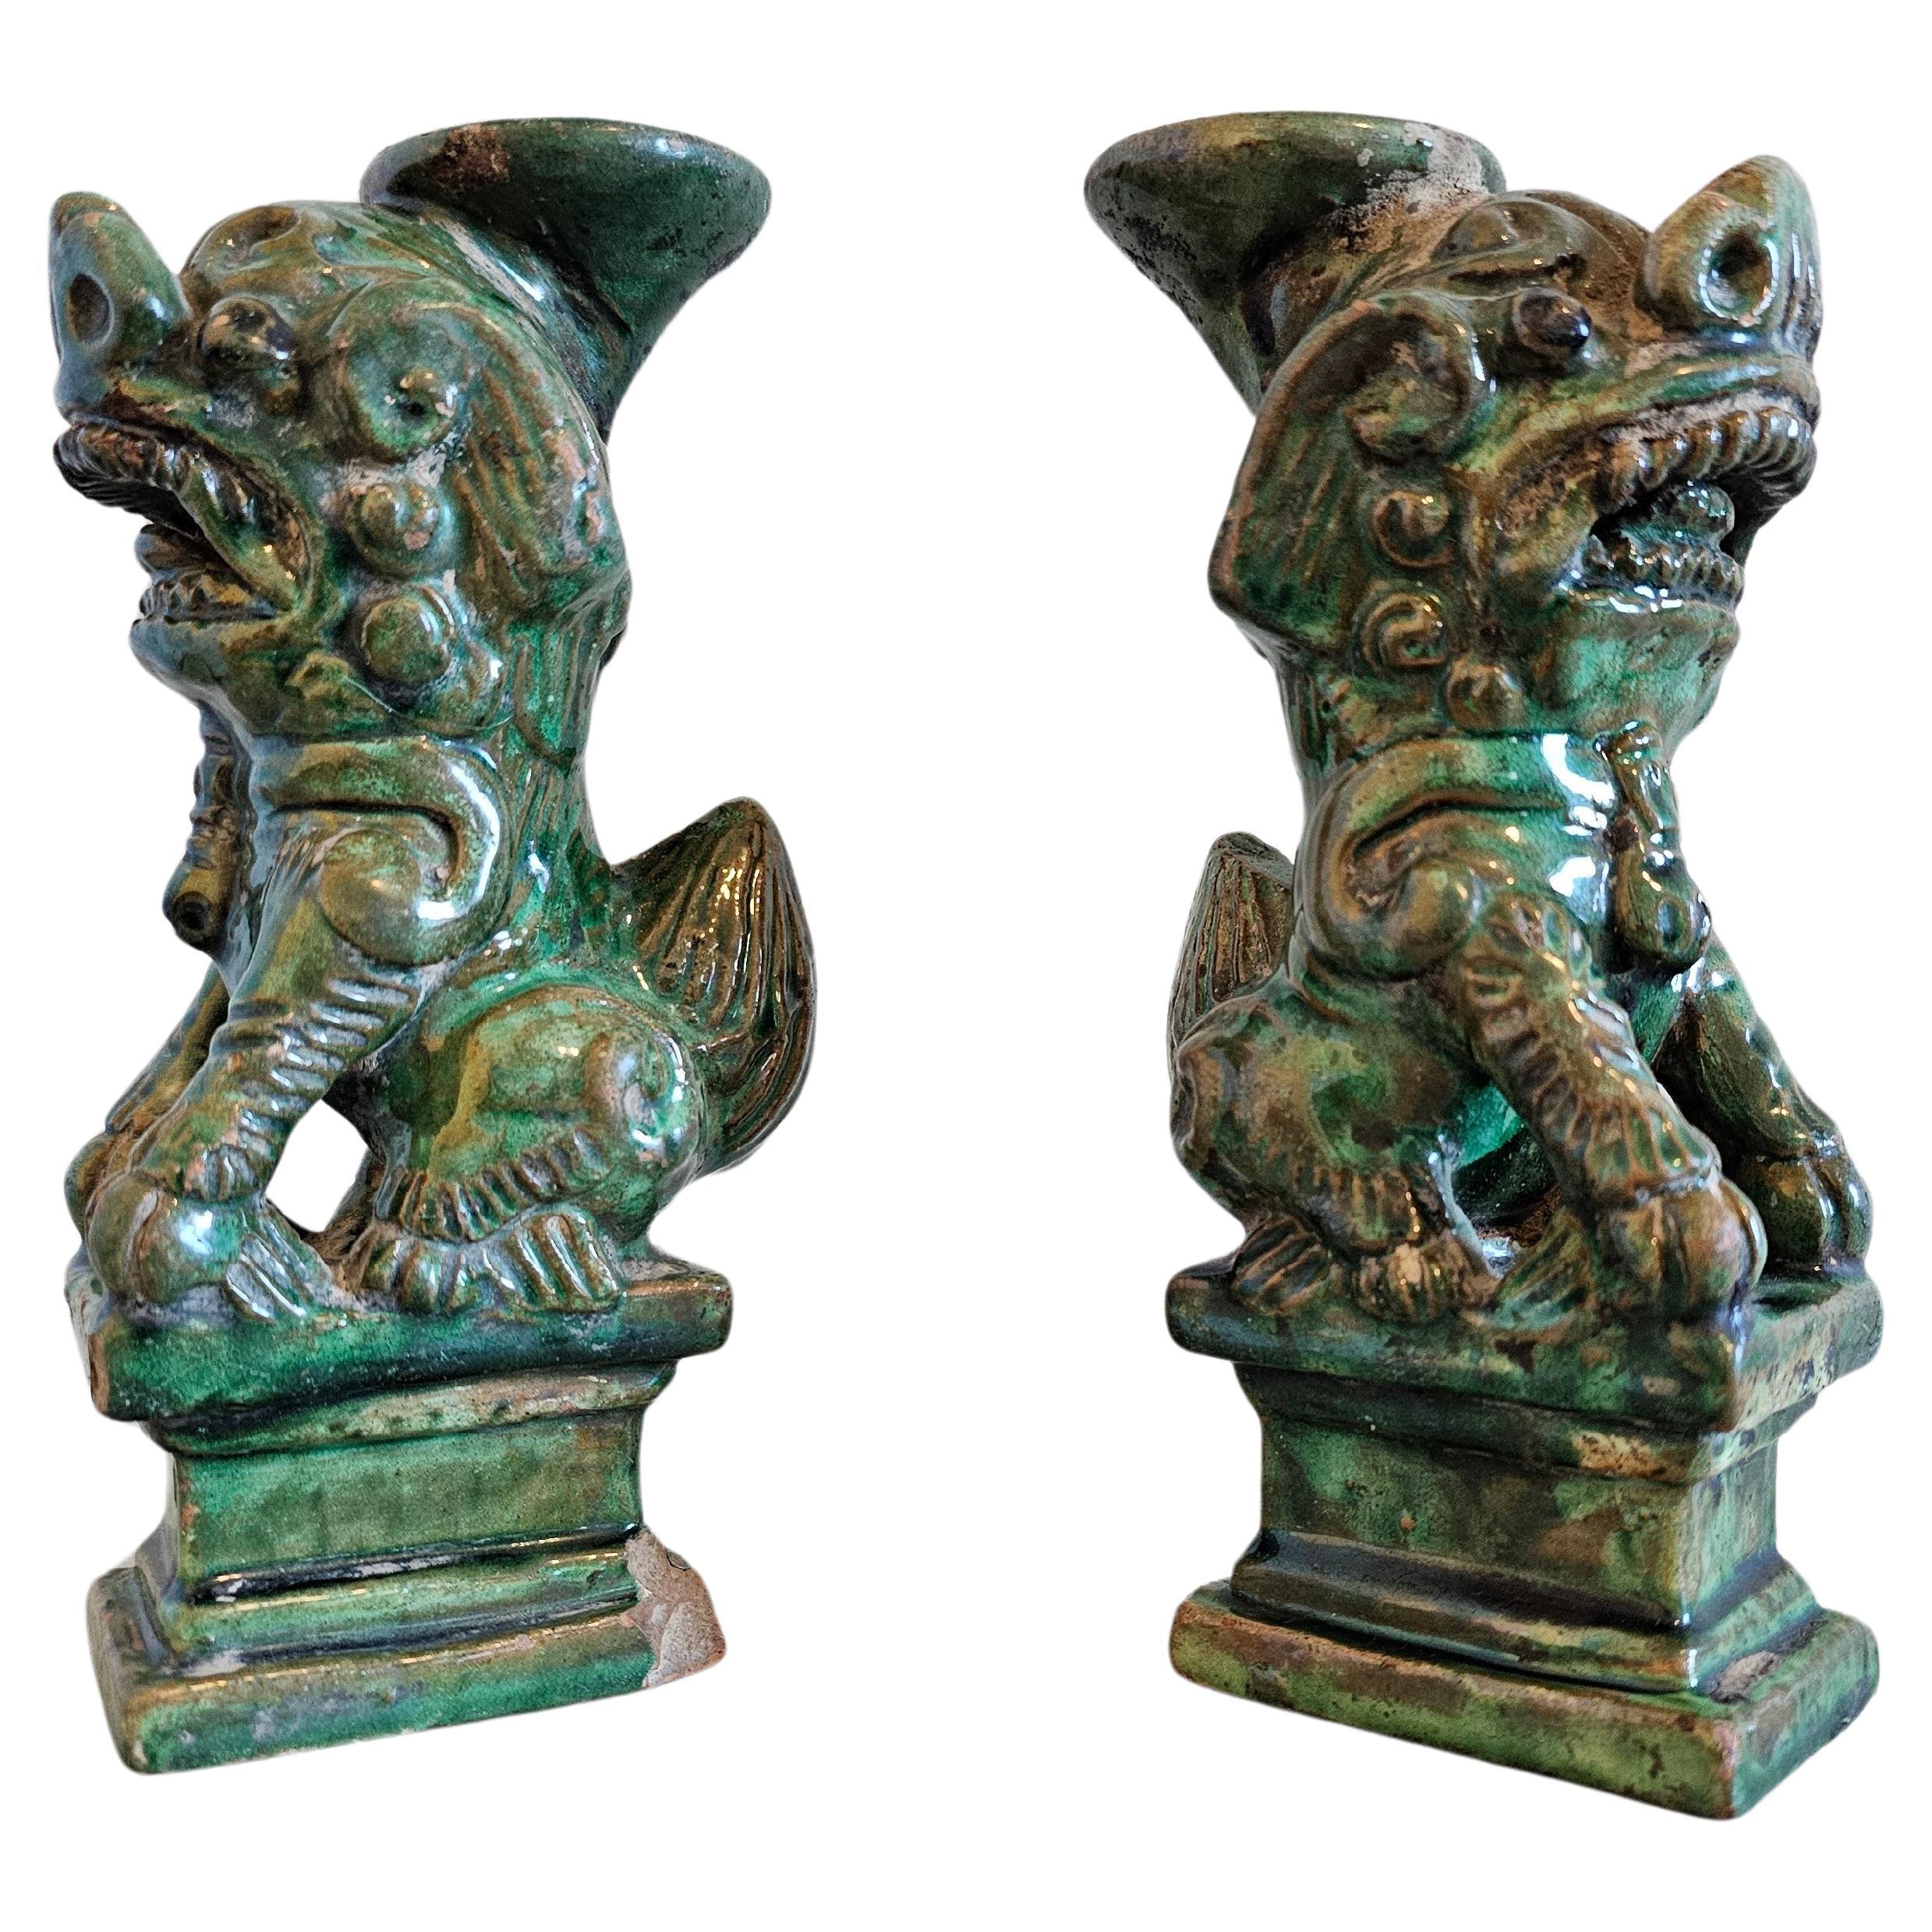 A whimsical pair of late Qing Dynasty (1636-1912) Chinese pottery Sancai green glazed joss stick incense holders. circa 1890

Born in China around the turn of the late 19th / early 20th century, exceptionally executed small sculptural form, modeled